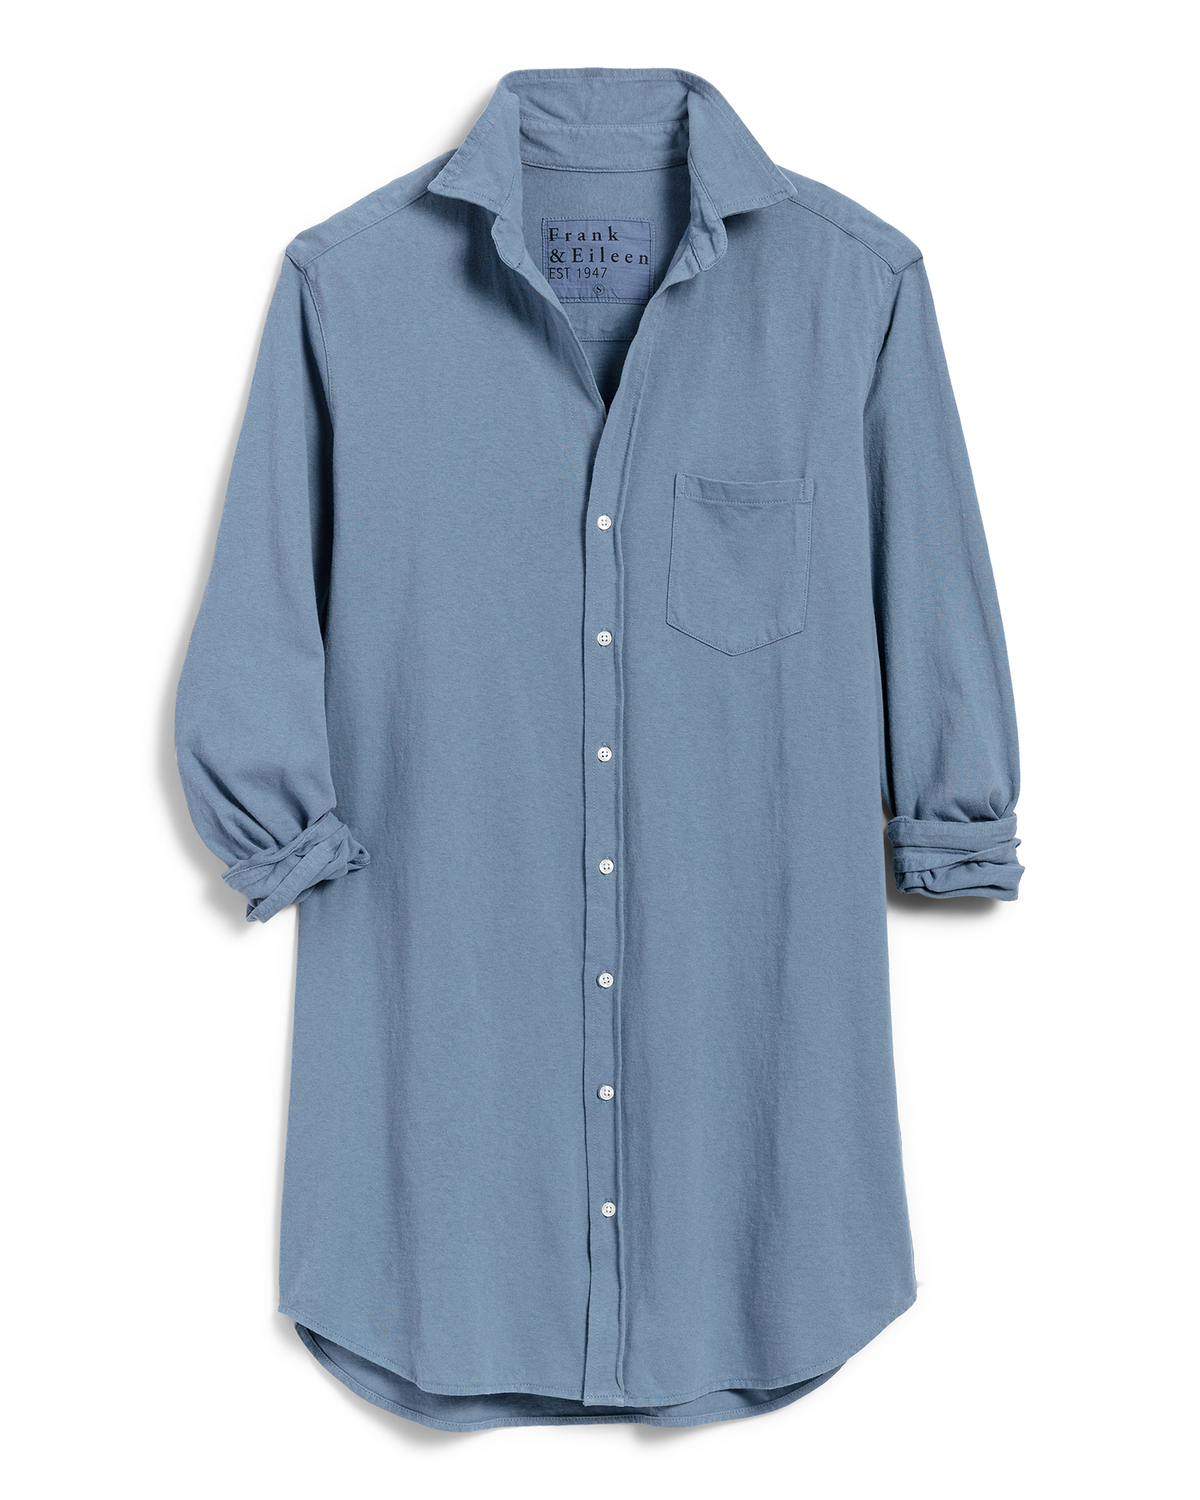 Mary Knit Shirtdress in Jean